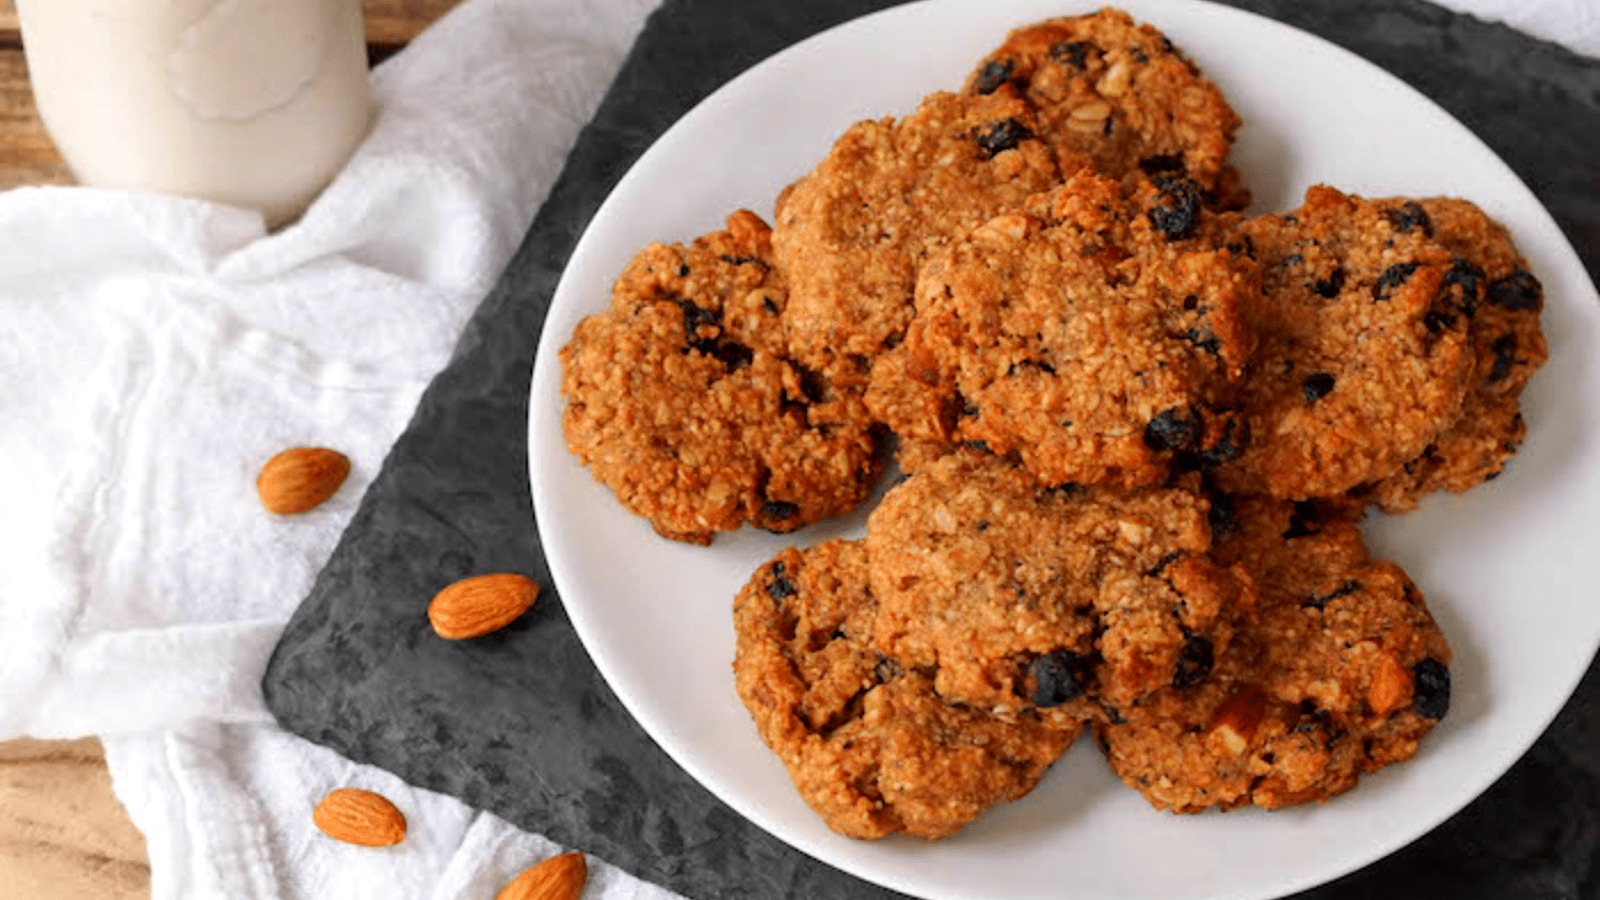 Image of Almond Trail Mix Cookies